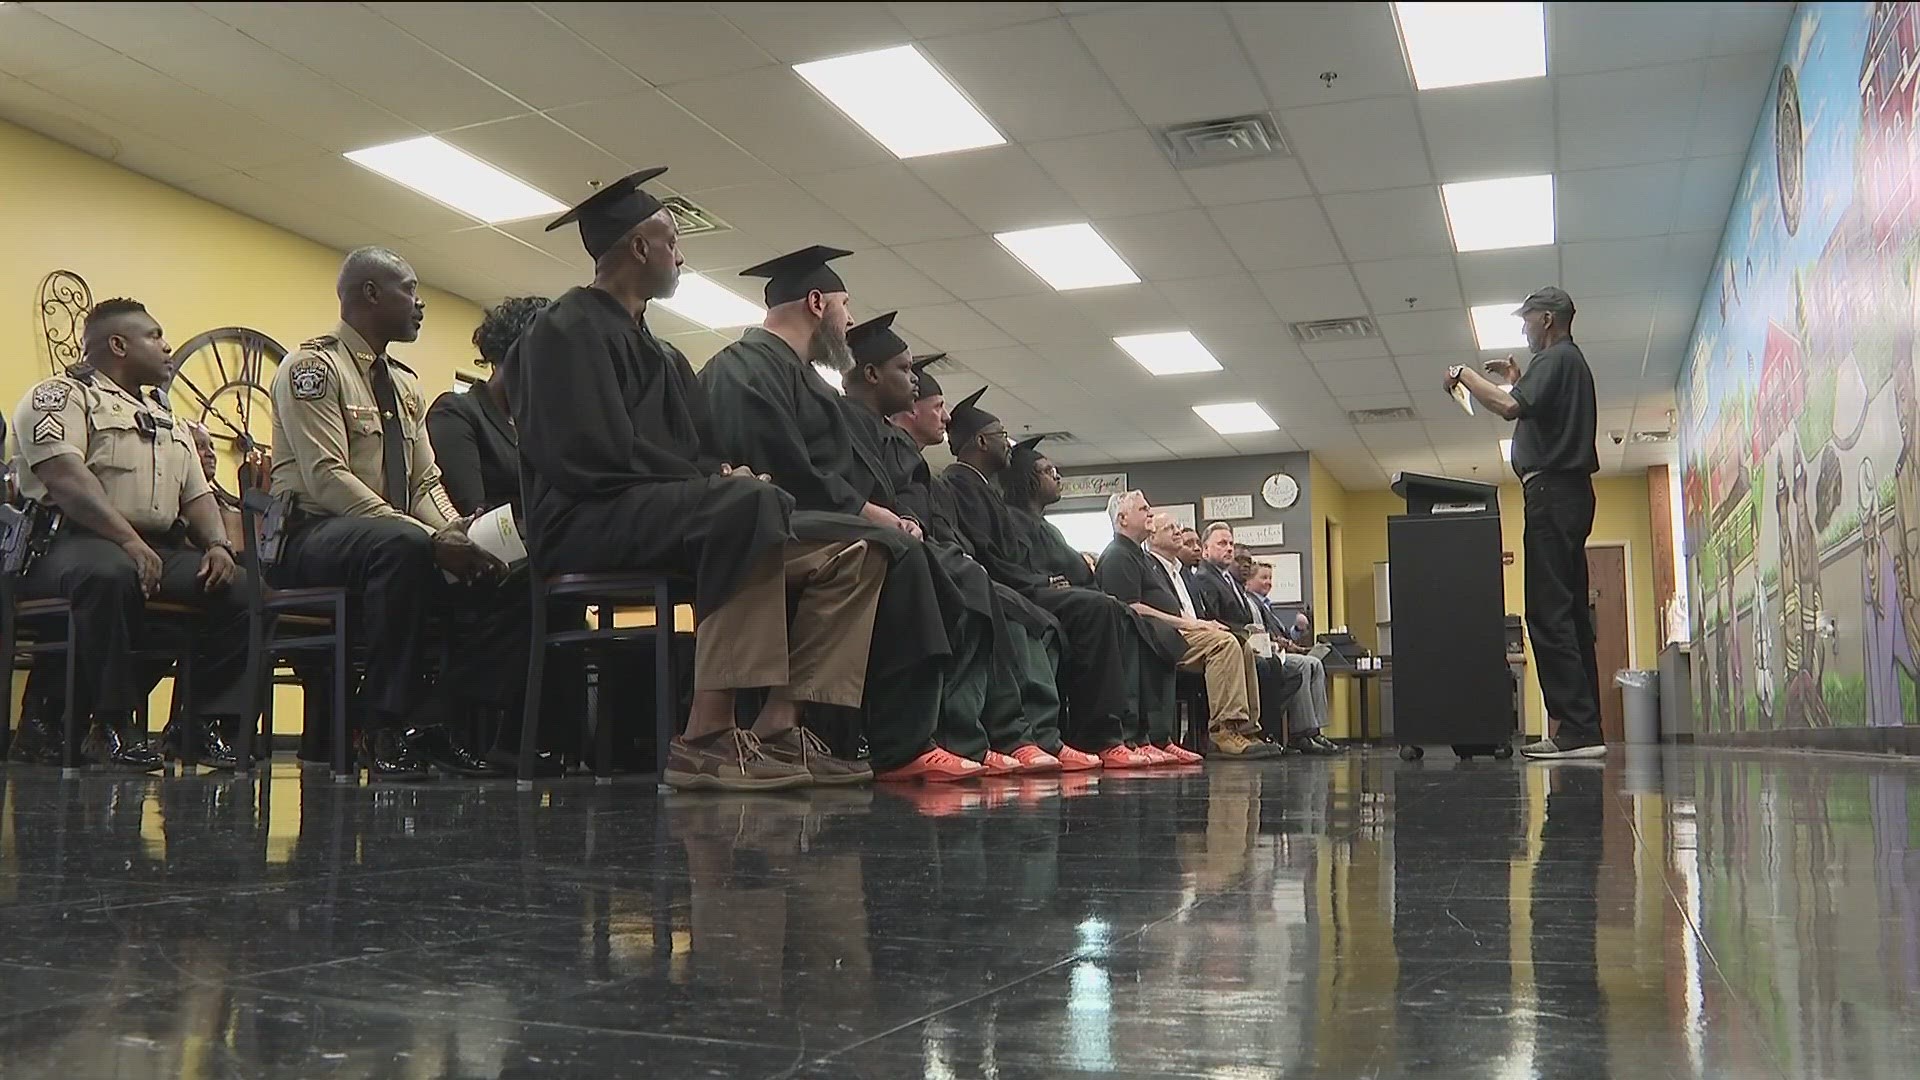 The 100-hour program helps prepare inmates for life outside bars. Sheriff Reginal Scandrett says this will help fight recidivism in the county.